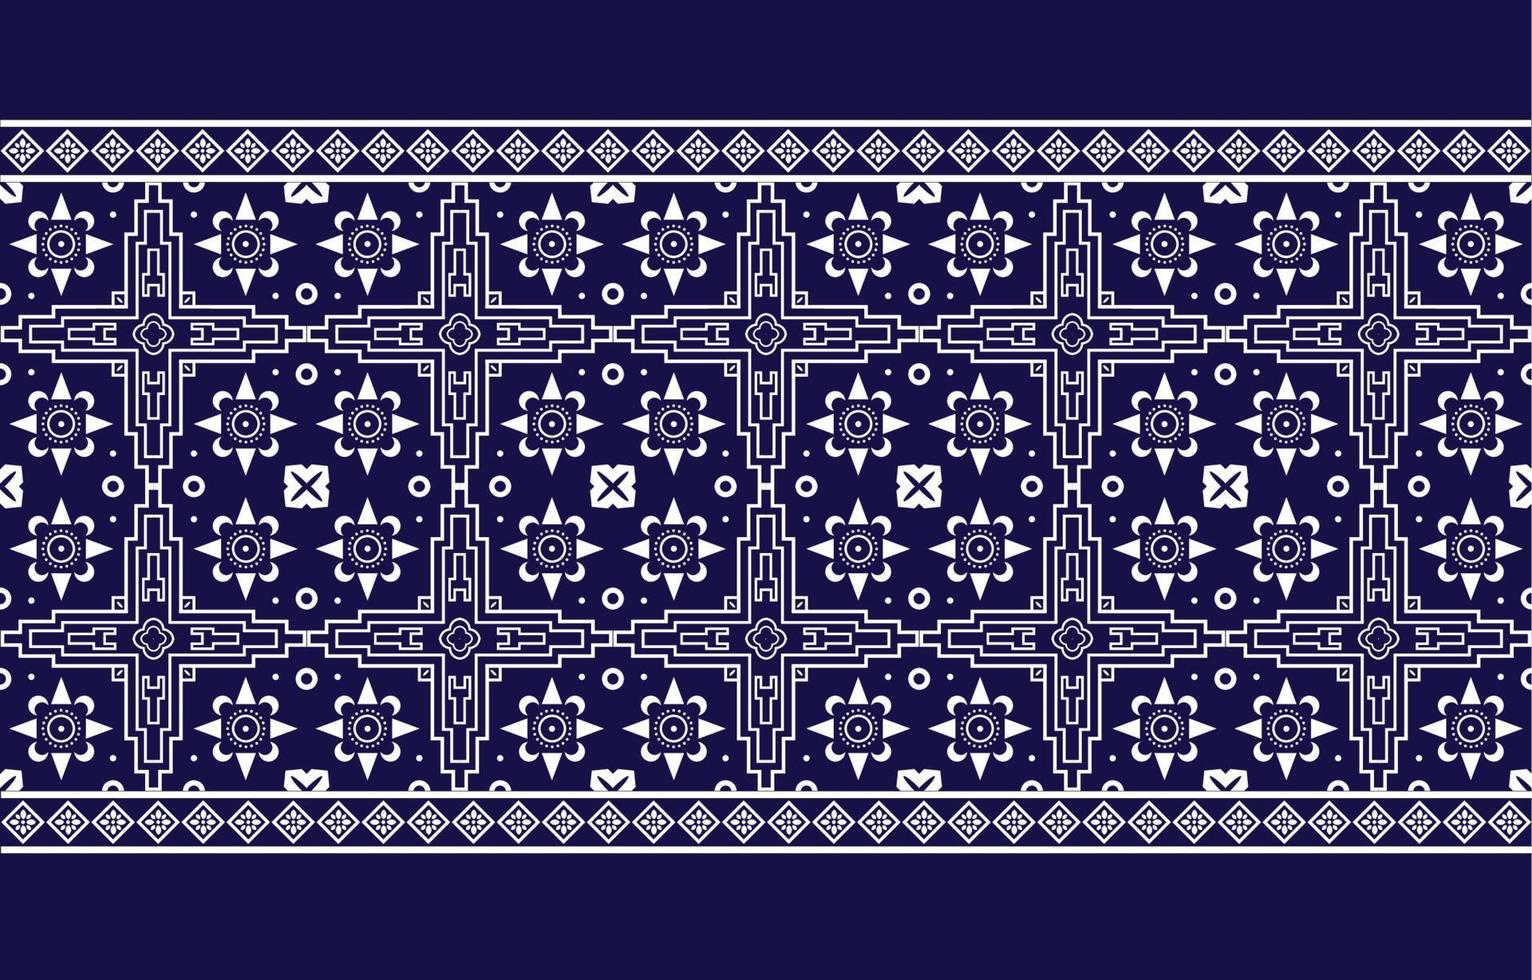 Decorative abstract geomatrical ethnic oriental pattern traditional,Abstract ethnic floral background Design for carpet,wallpaper,clothing,wrapping,batik,fabric,traditional print vector